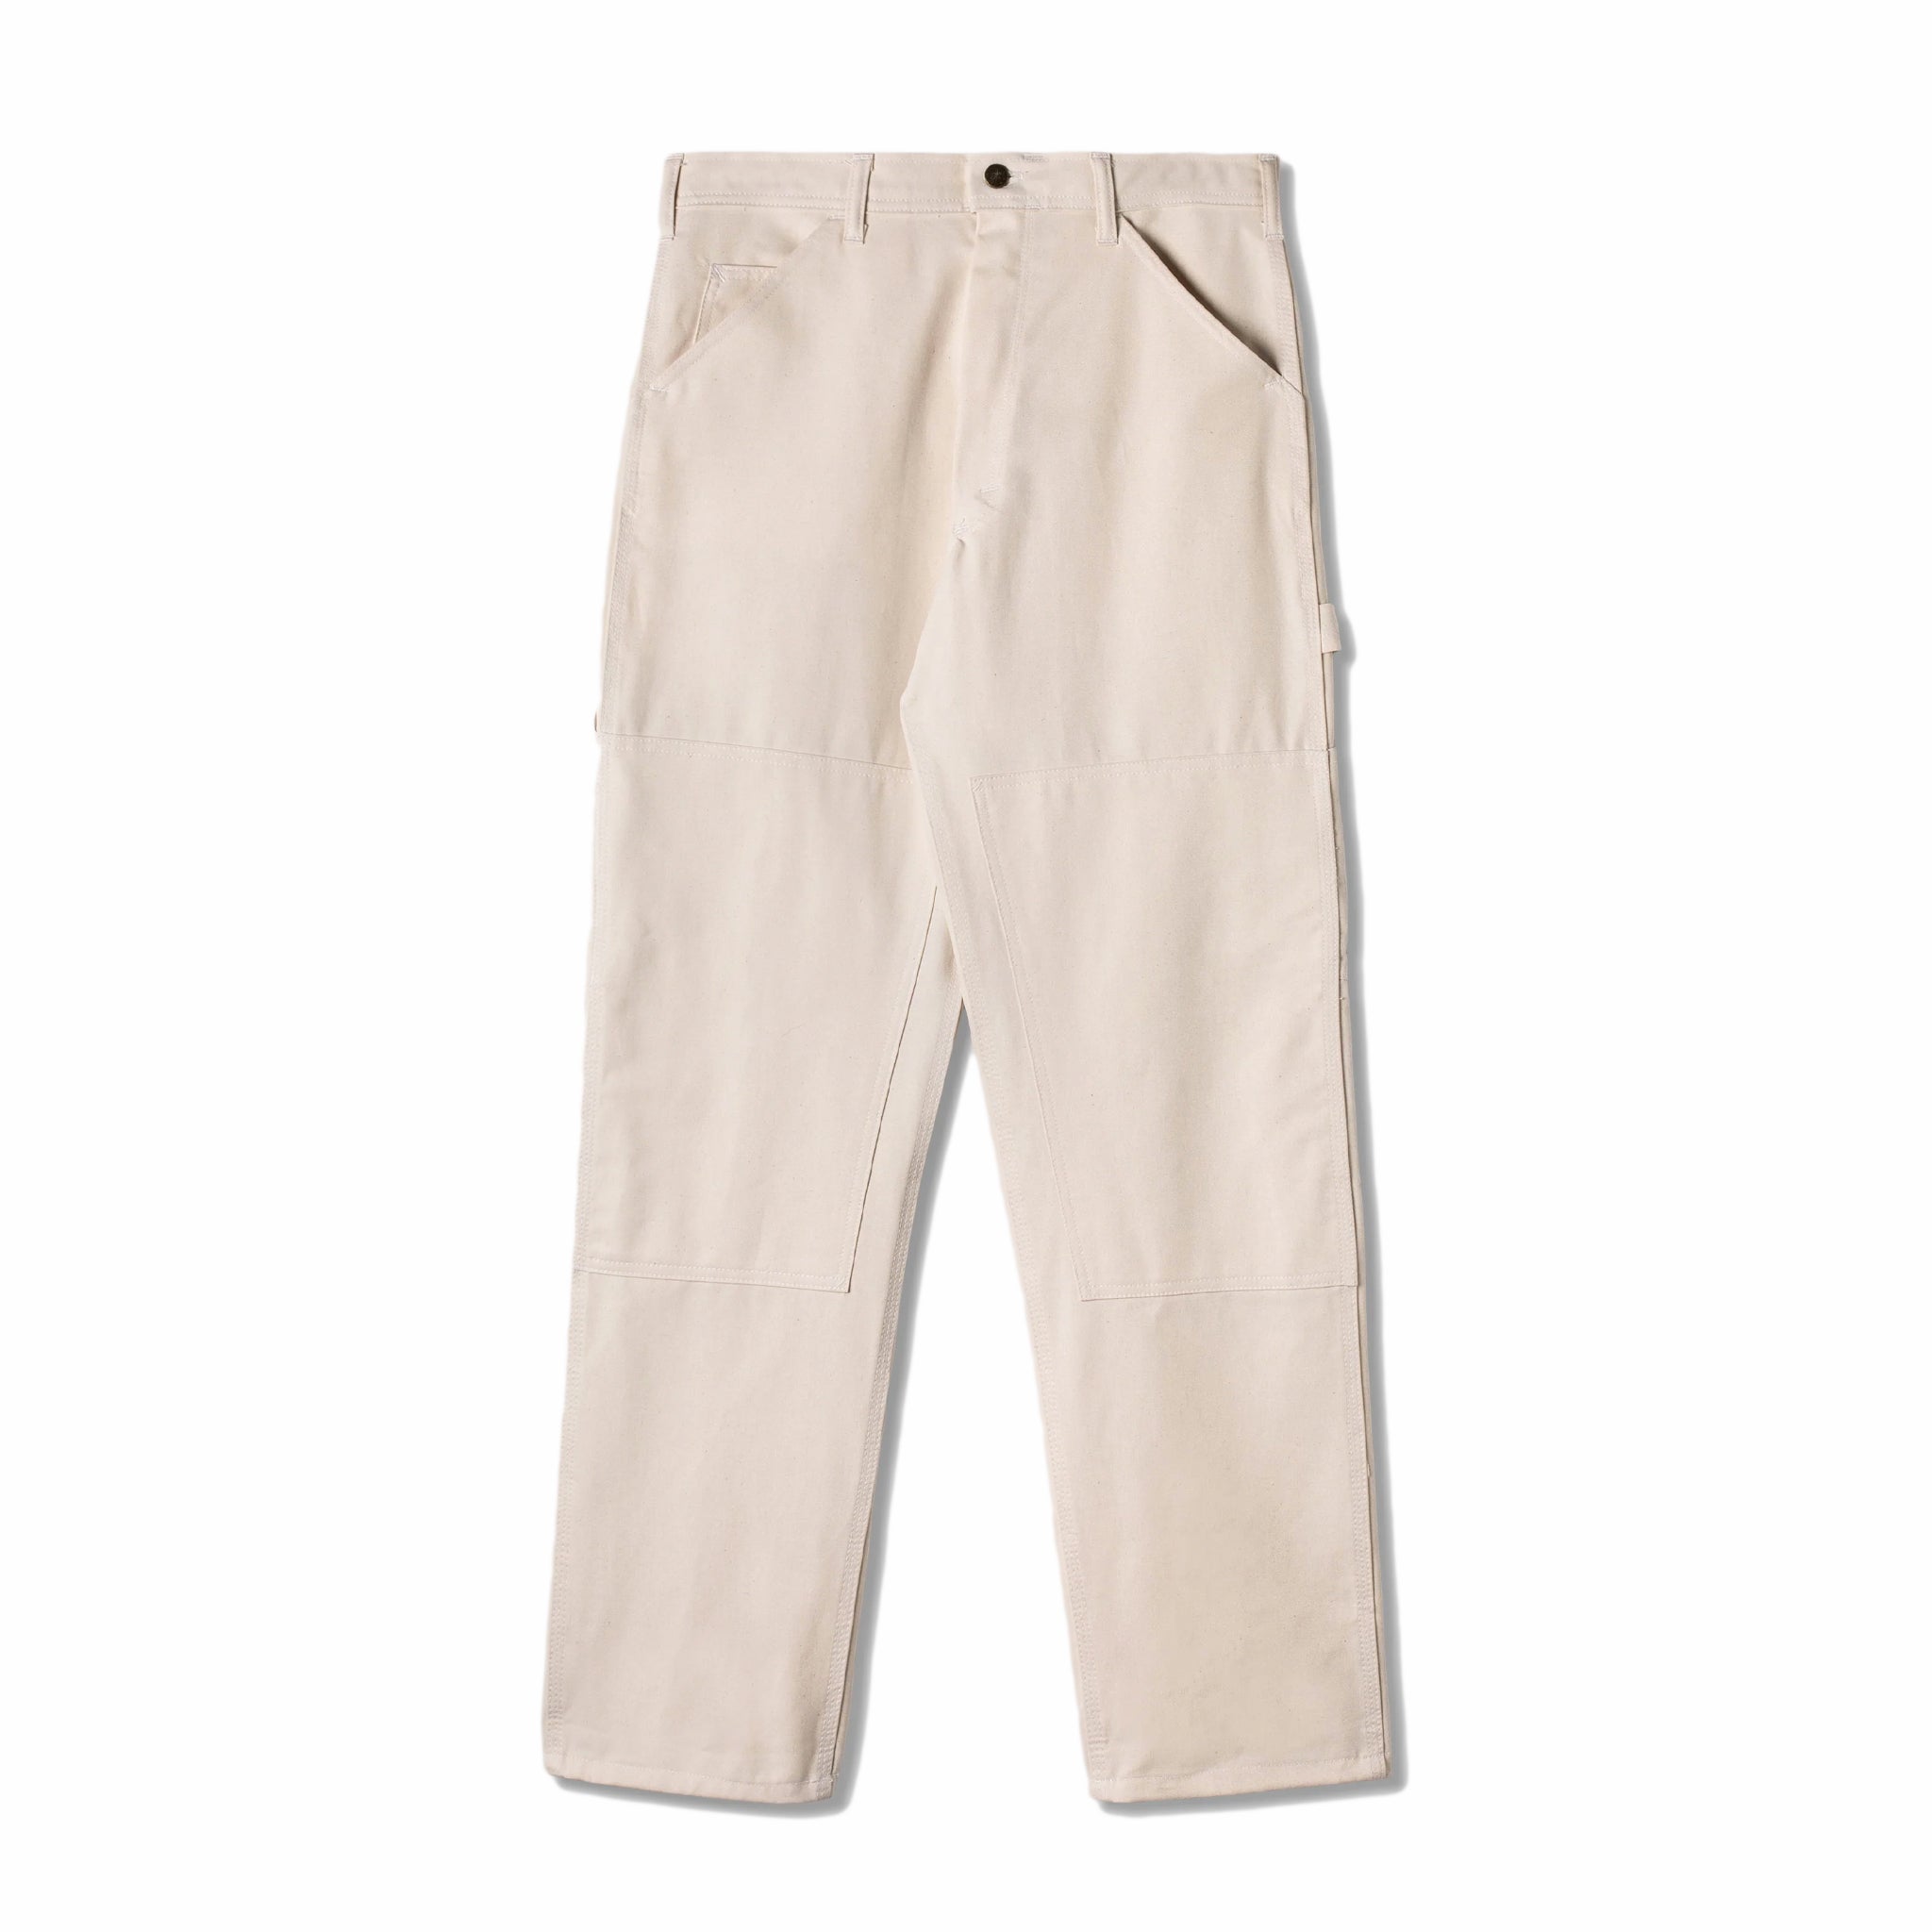 Stan Ray Double Knee Painter Pant 0154 (Natural Drill) - August Shop